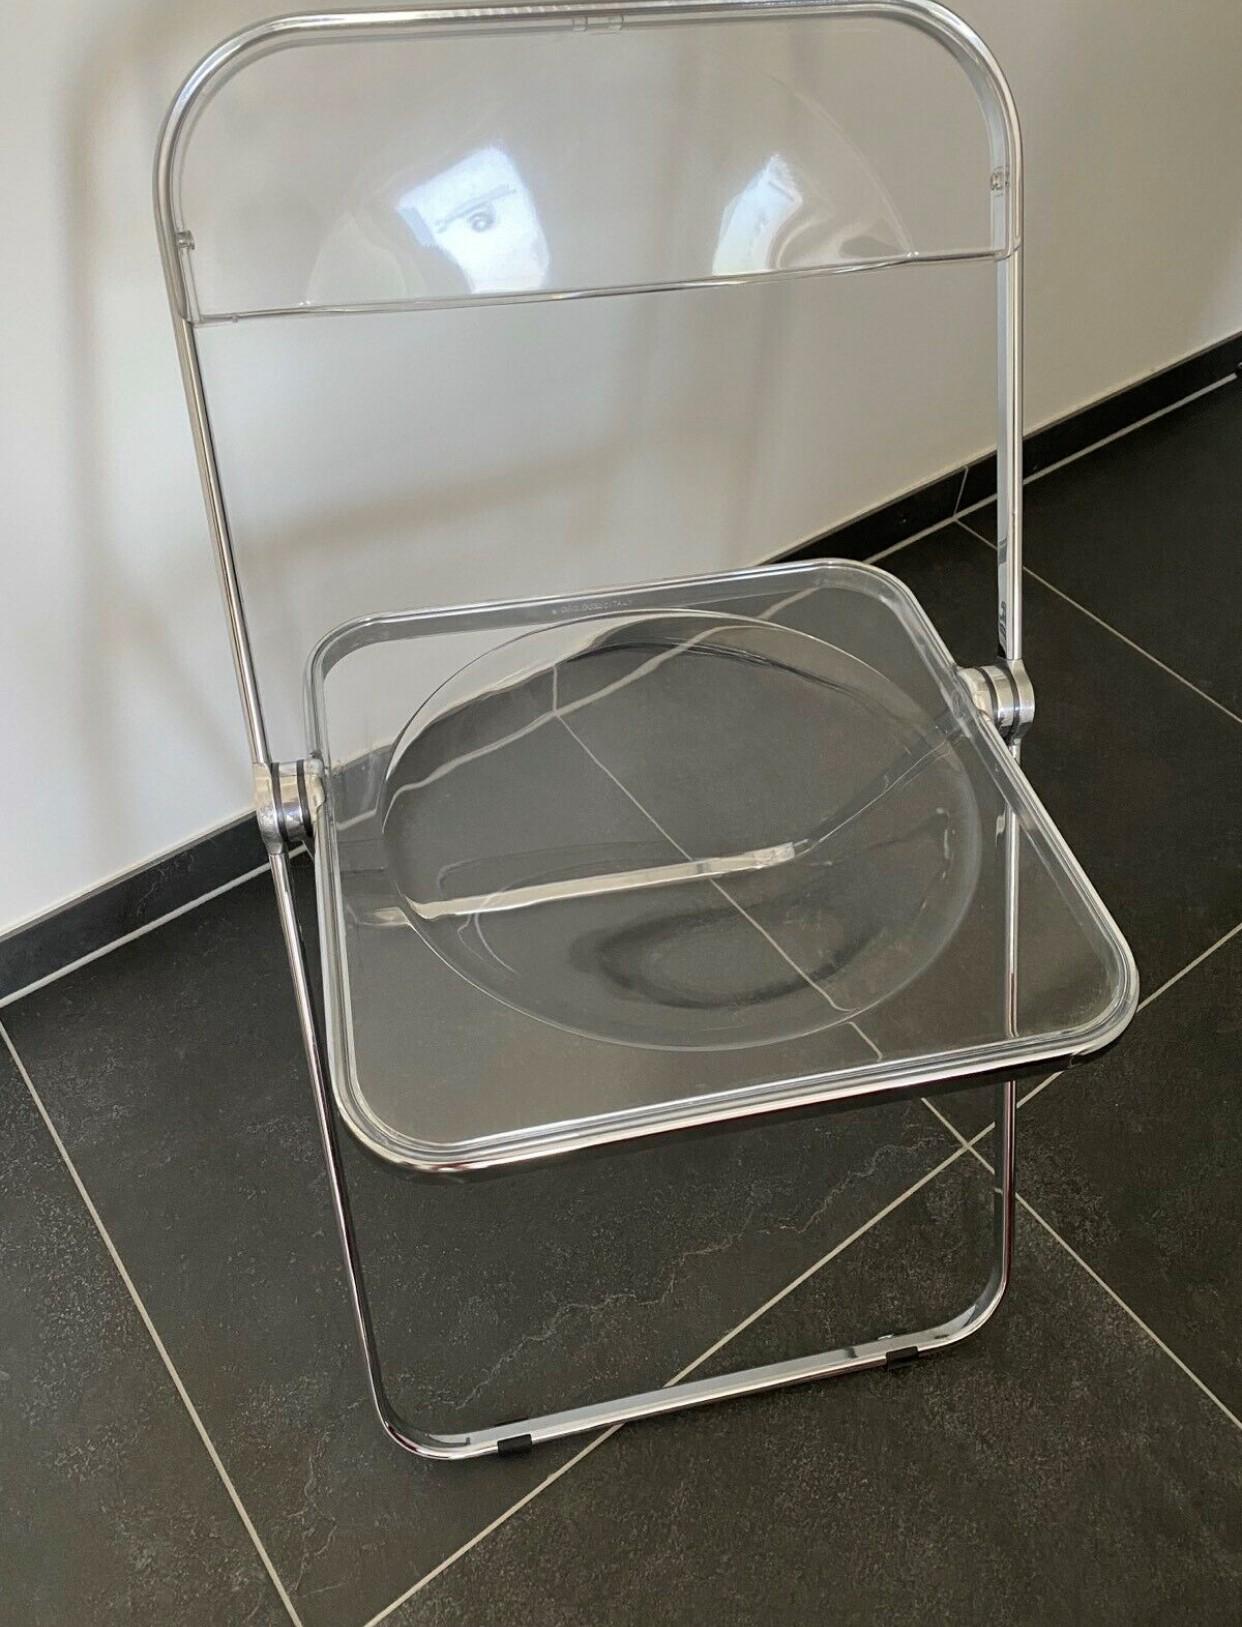 3 Space Age chrome and transparent lucite folding chairs designed by Giancarlo Piretti for Castelli, Italy. 

With steel frame, seat and back in clear lucite, it represents the realization of “democratic design” and is exhibited at the MoMa museum